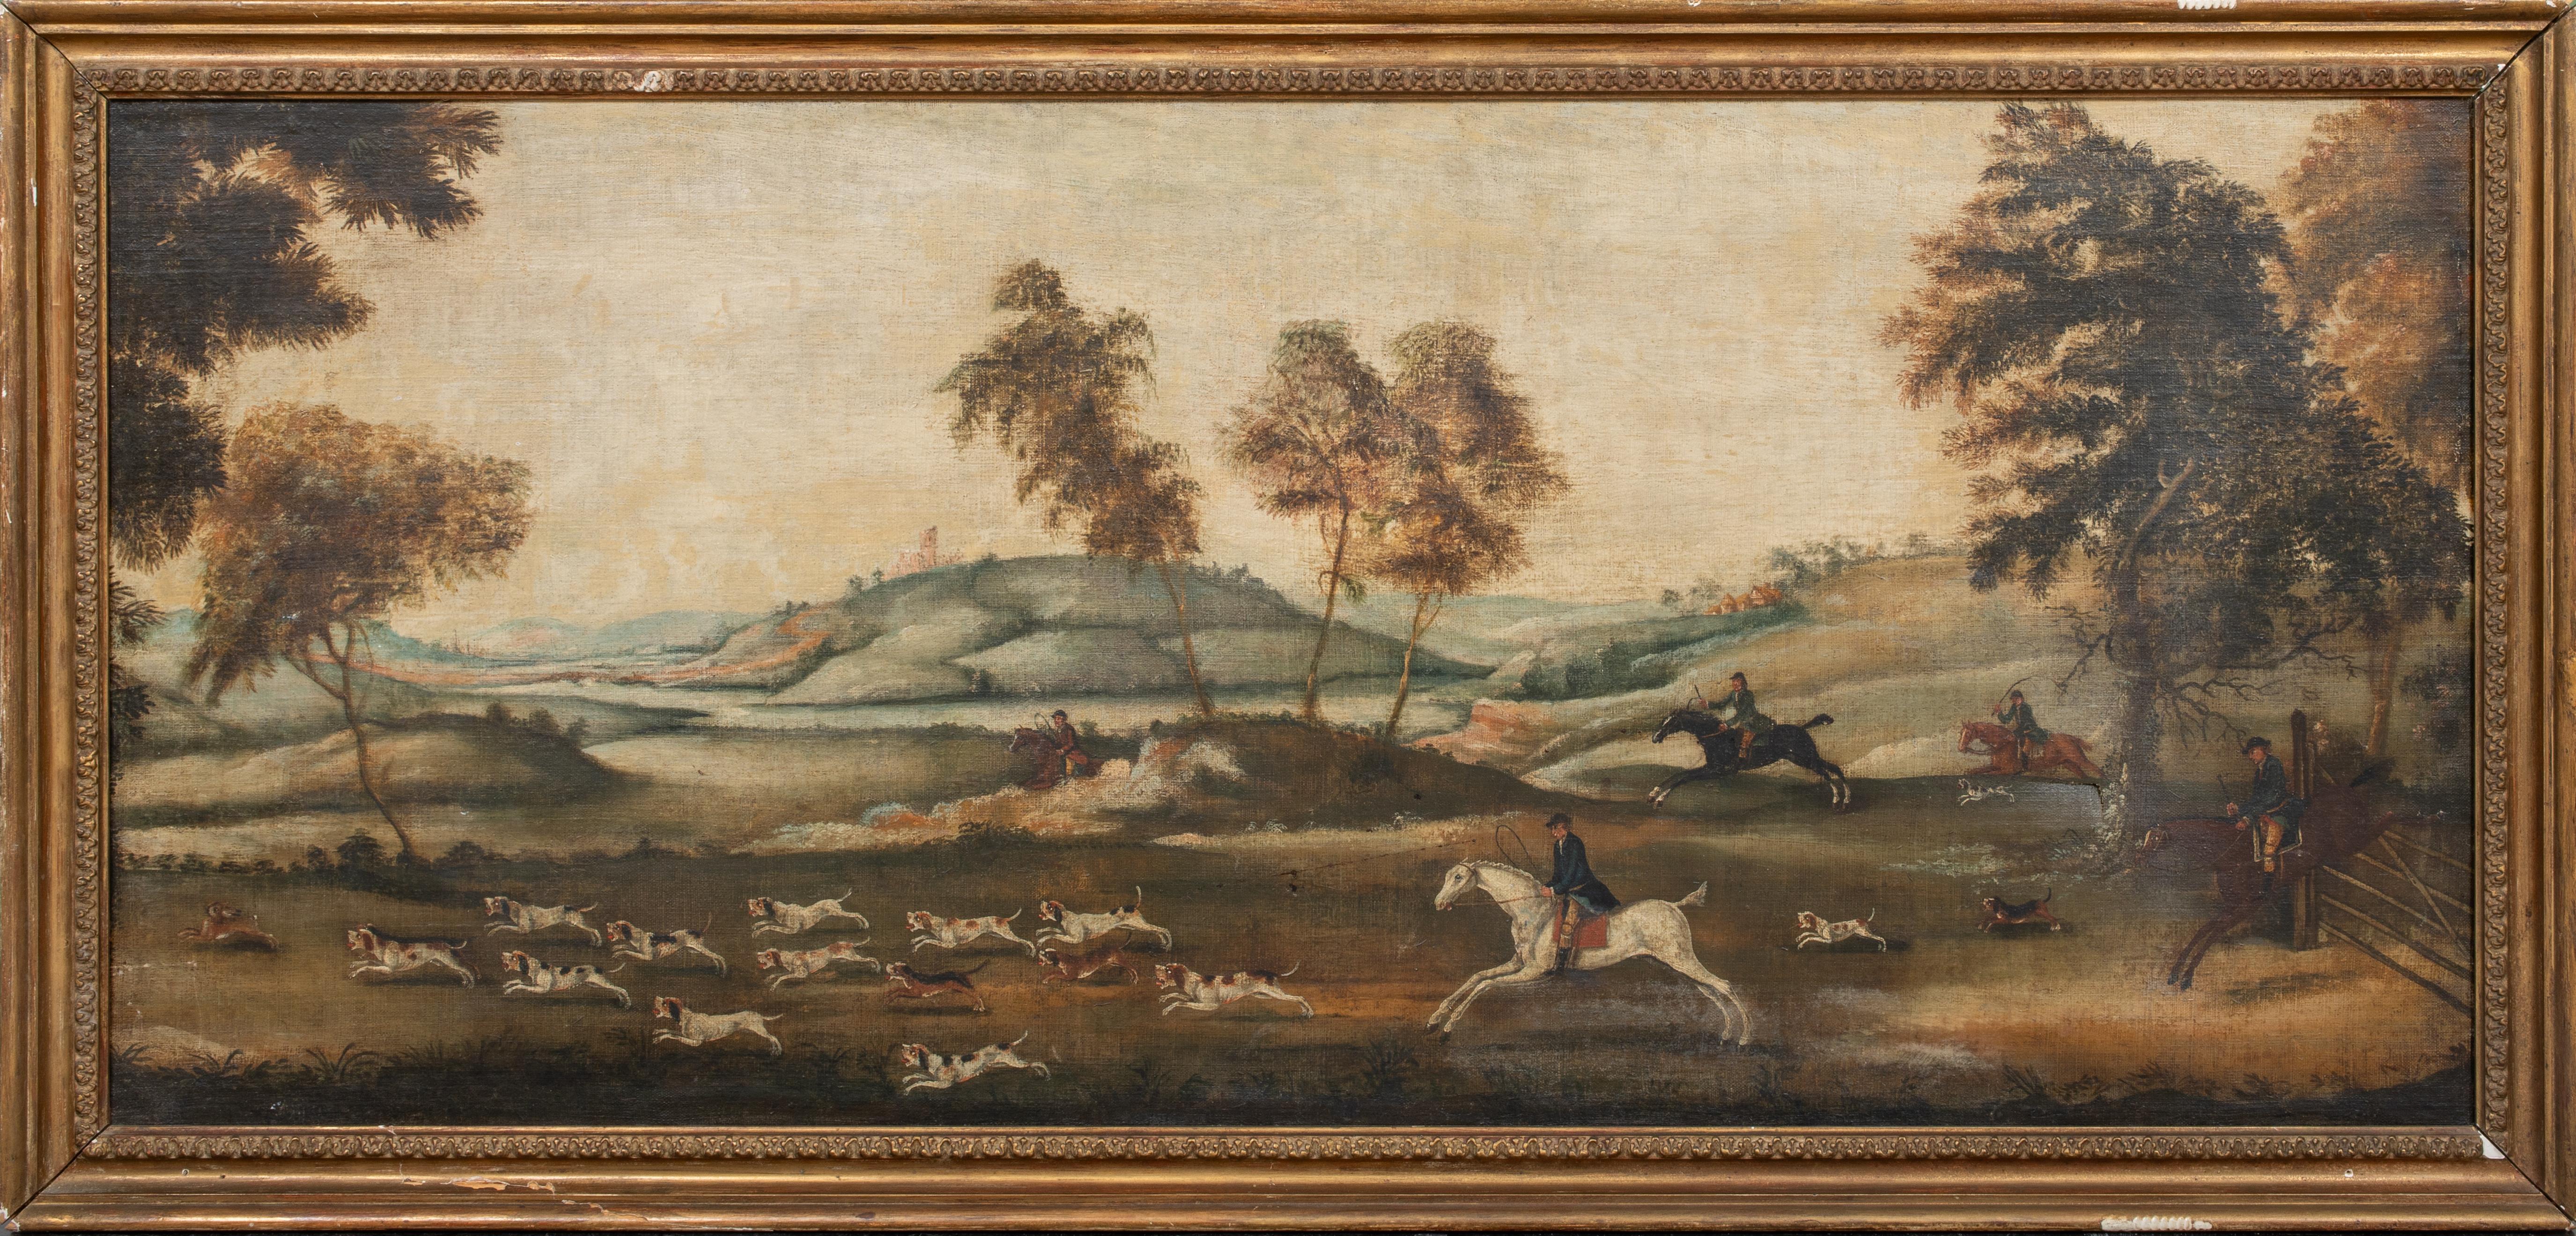 The Fox Hunting Party, dated 1770

John Nost SARTORIUS (1759-1828) - names of the hunting party fully inscribed by the artist verso

Large 18th Century English Fox Hunting Party landscape, oil on canvas attributed to JohnNost Sartorius. Excellent